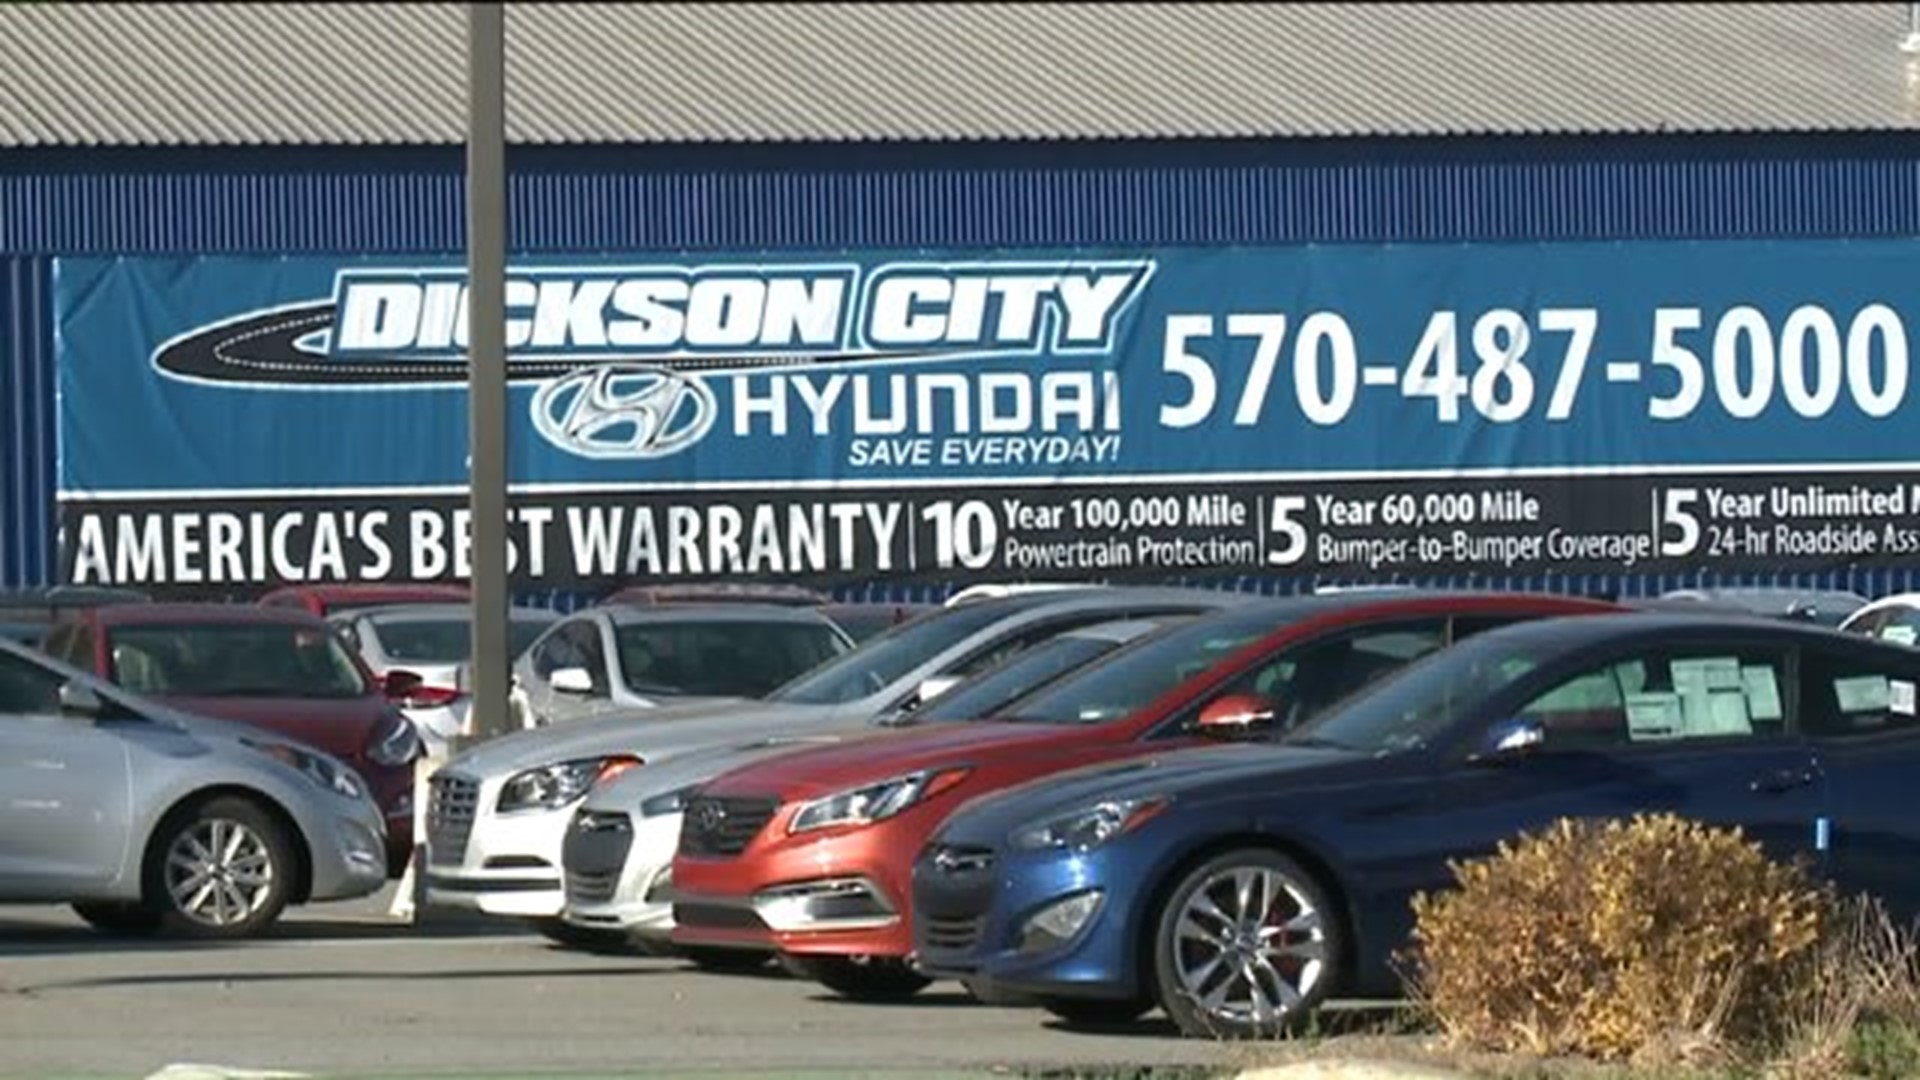 Local Auto Dealerships Accused of Bad Business Practices